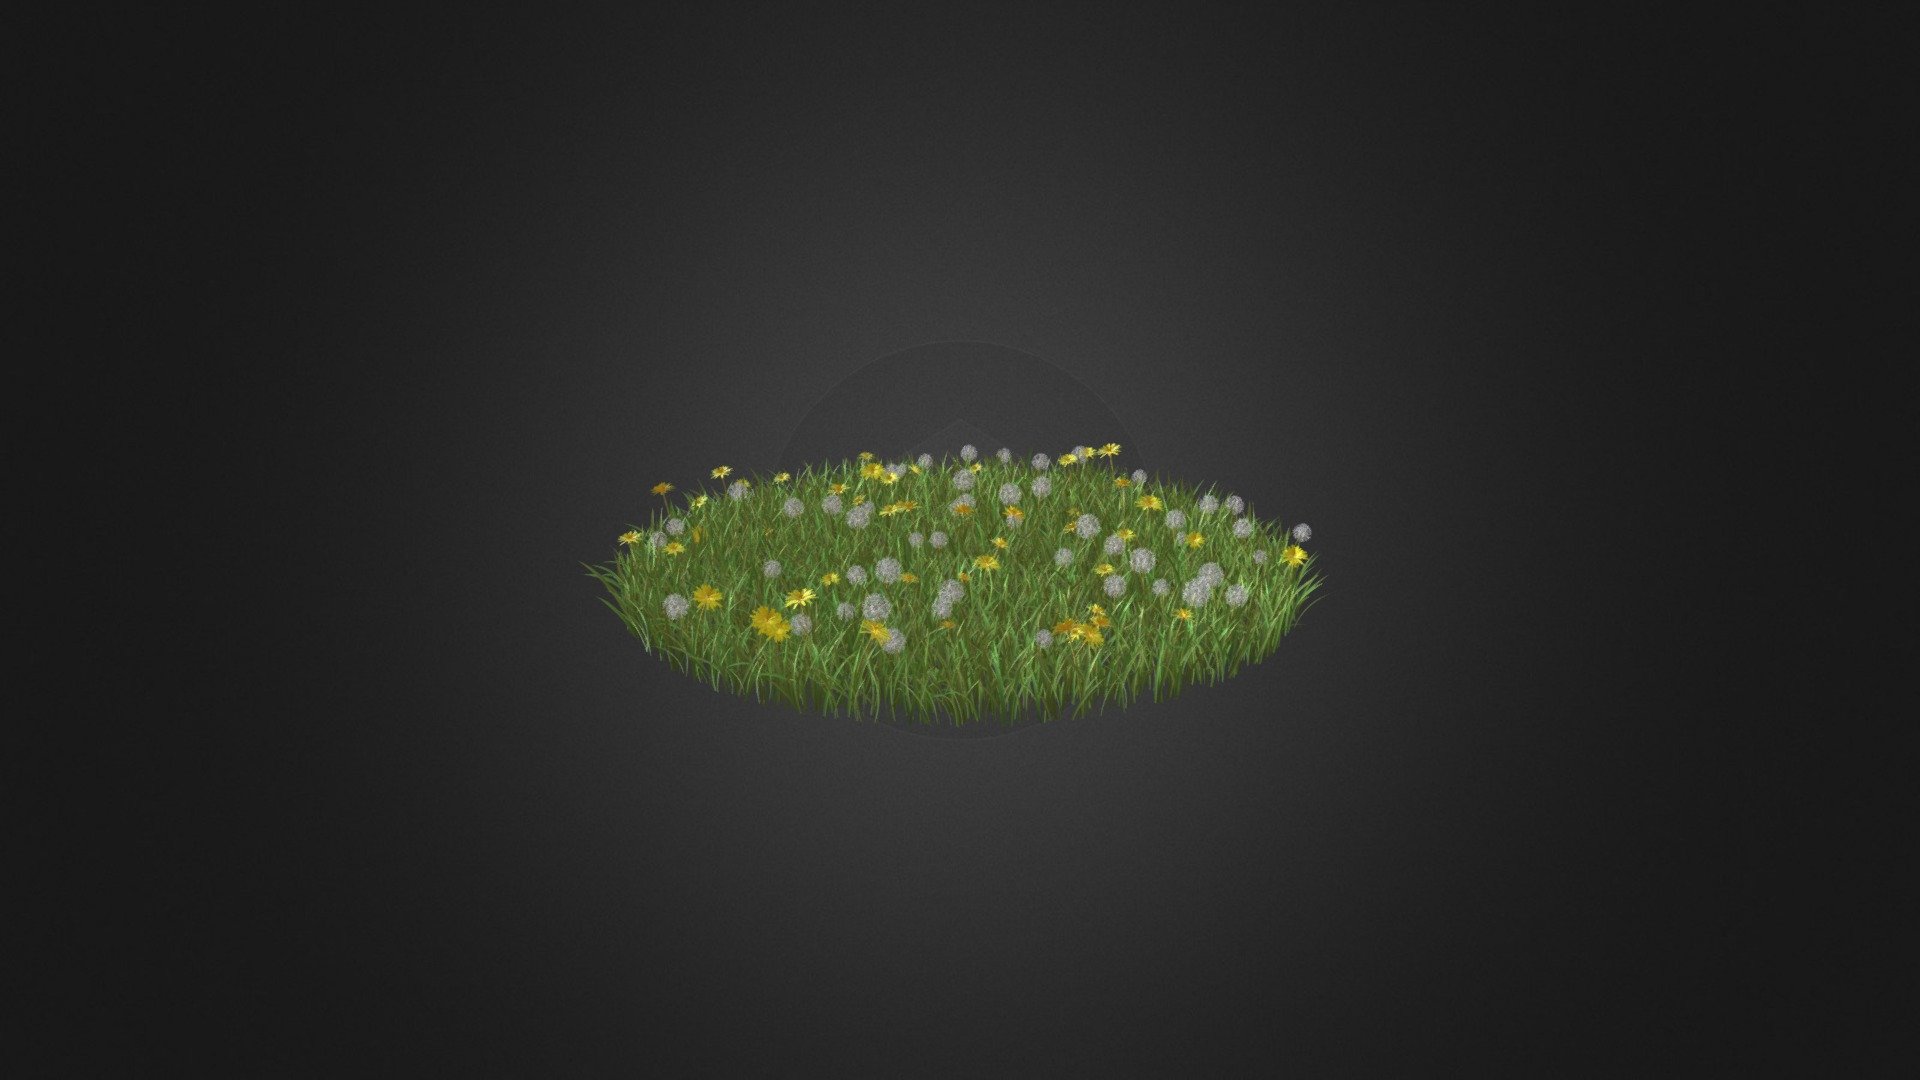 Round grass with some sow-thistle (Sonchus) flowers 3d model. Diameter:160cm. Compatible with 3ds max 2010 or higher, Cinema 4D and many more 3d model